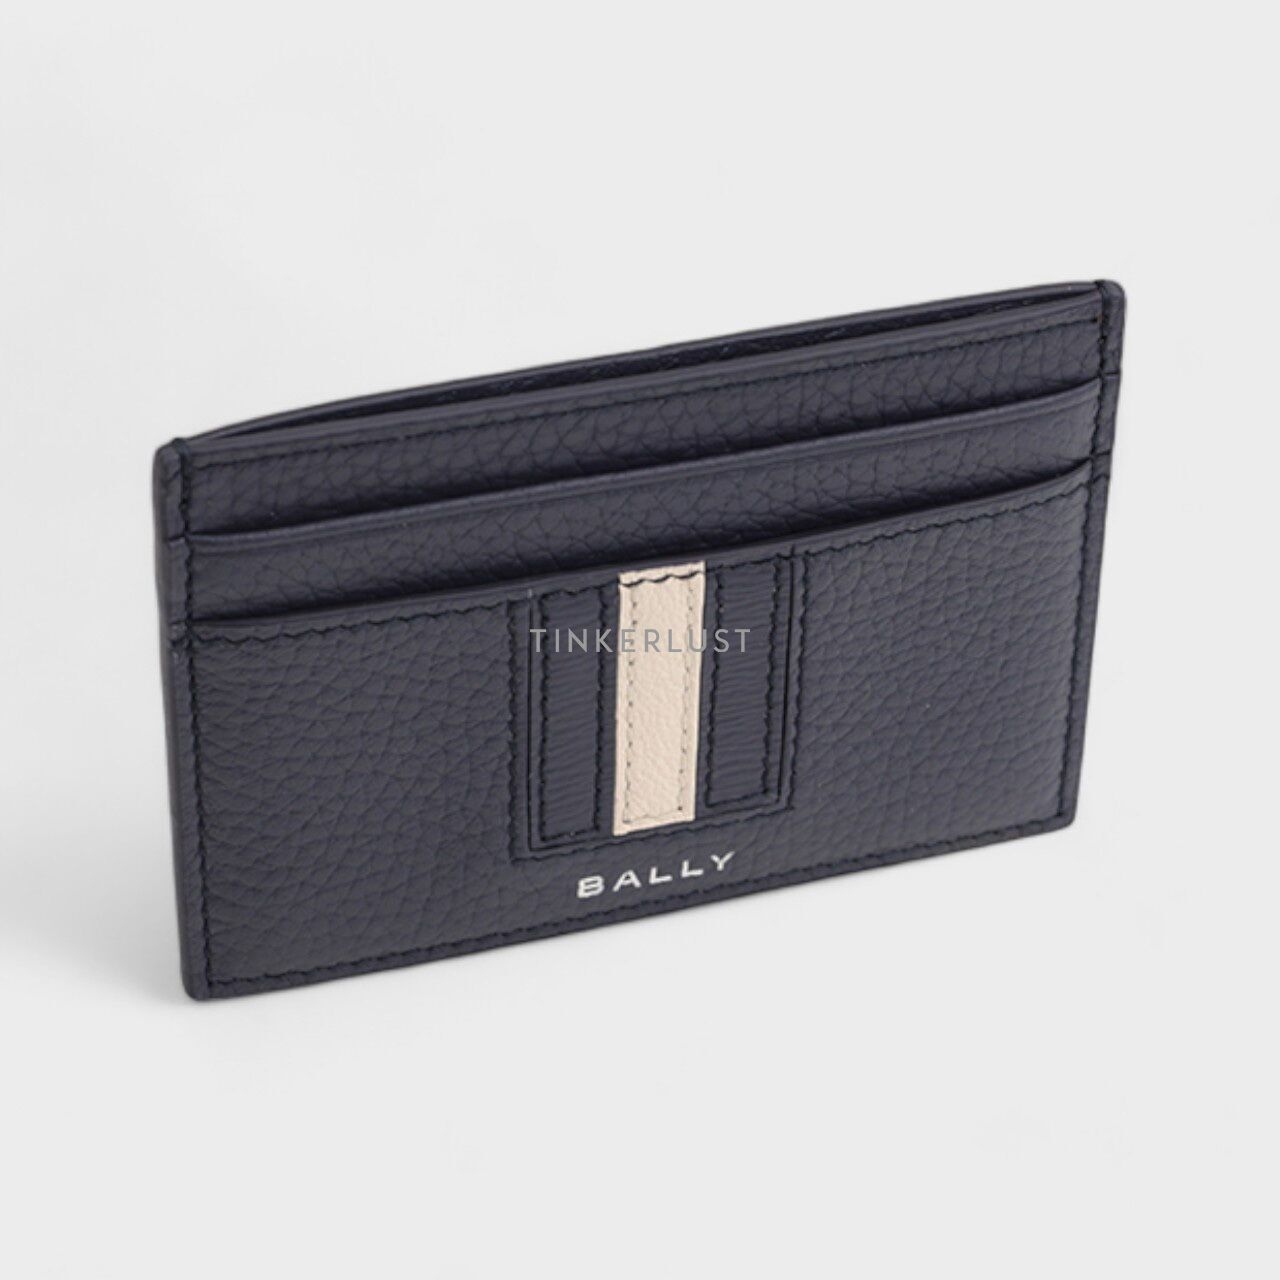 Bally Ribbon Card Holder in Midnight Blue Grained Leather Wallet